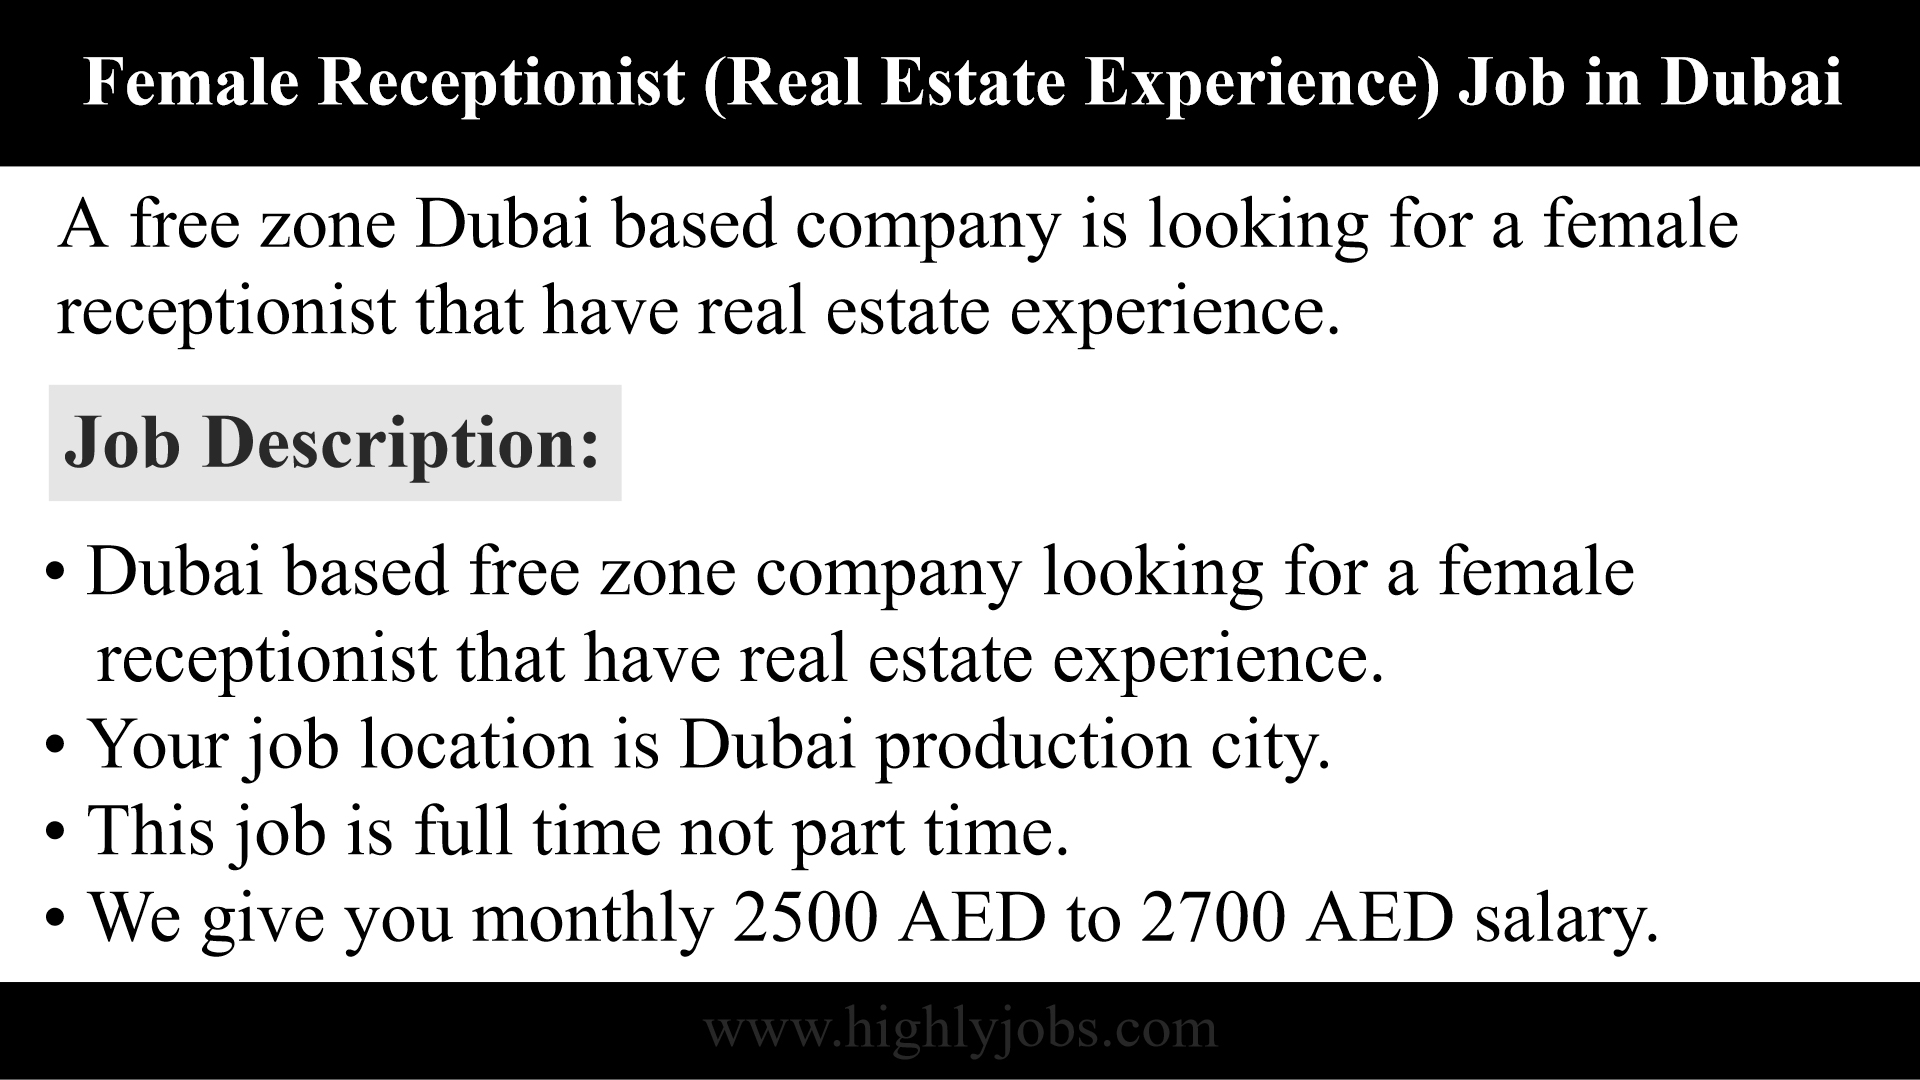 Female Receptionist with Real Estate Experience Job In Dubai